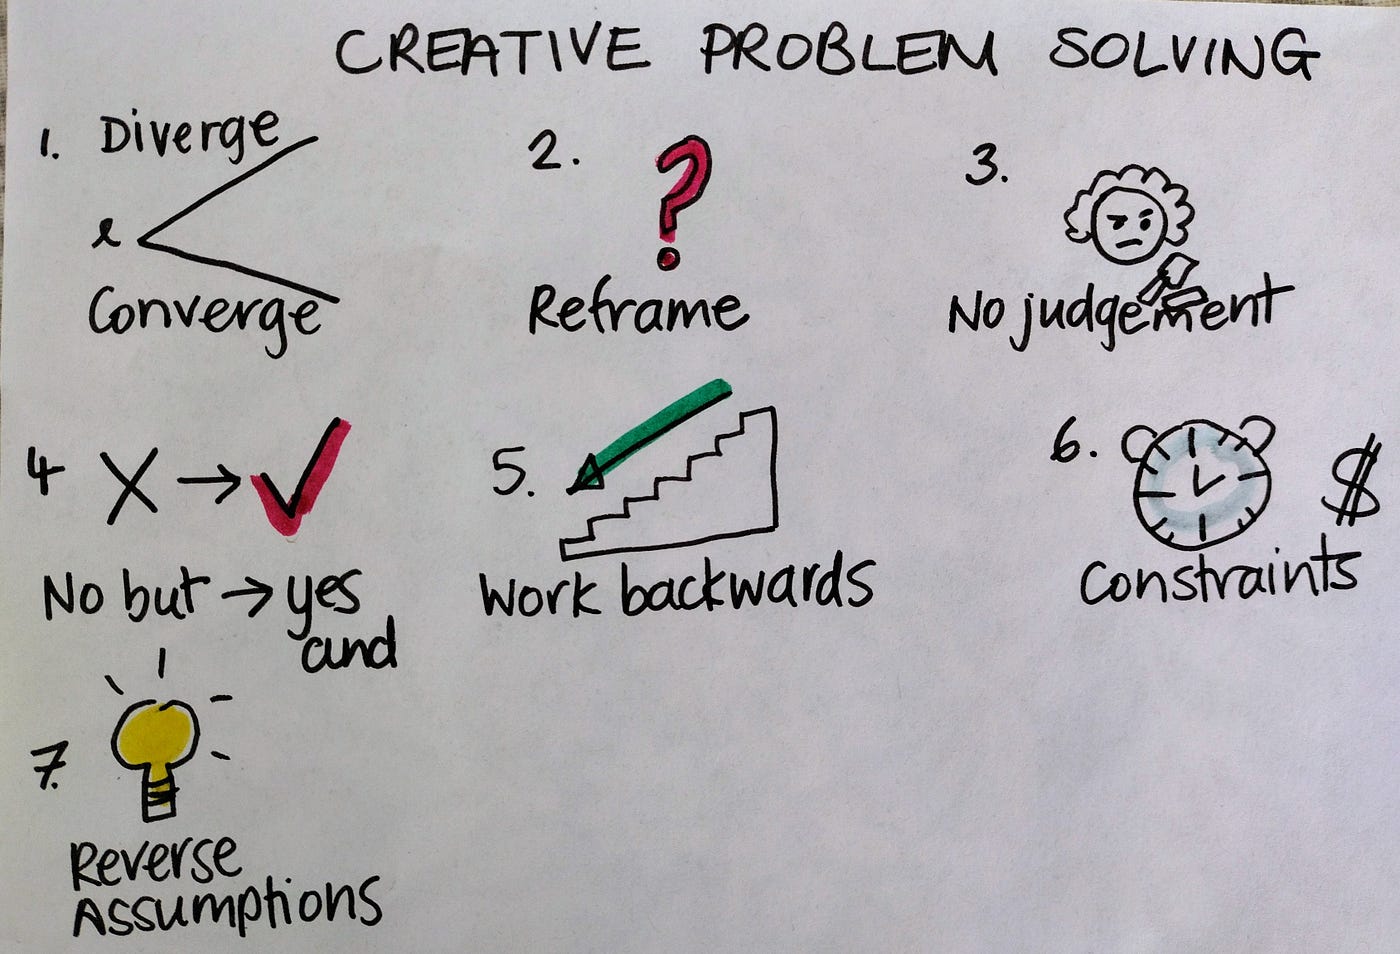 How to Solve a Problem Creatively | by Lisa Cunningham DeLauney | Medium